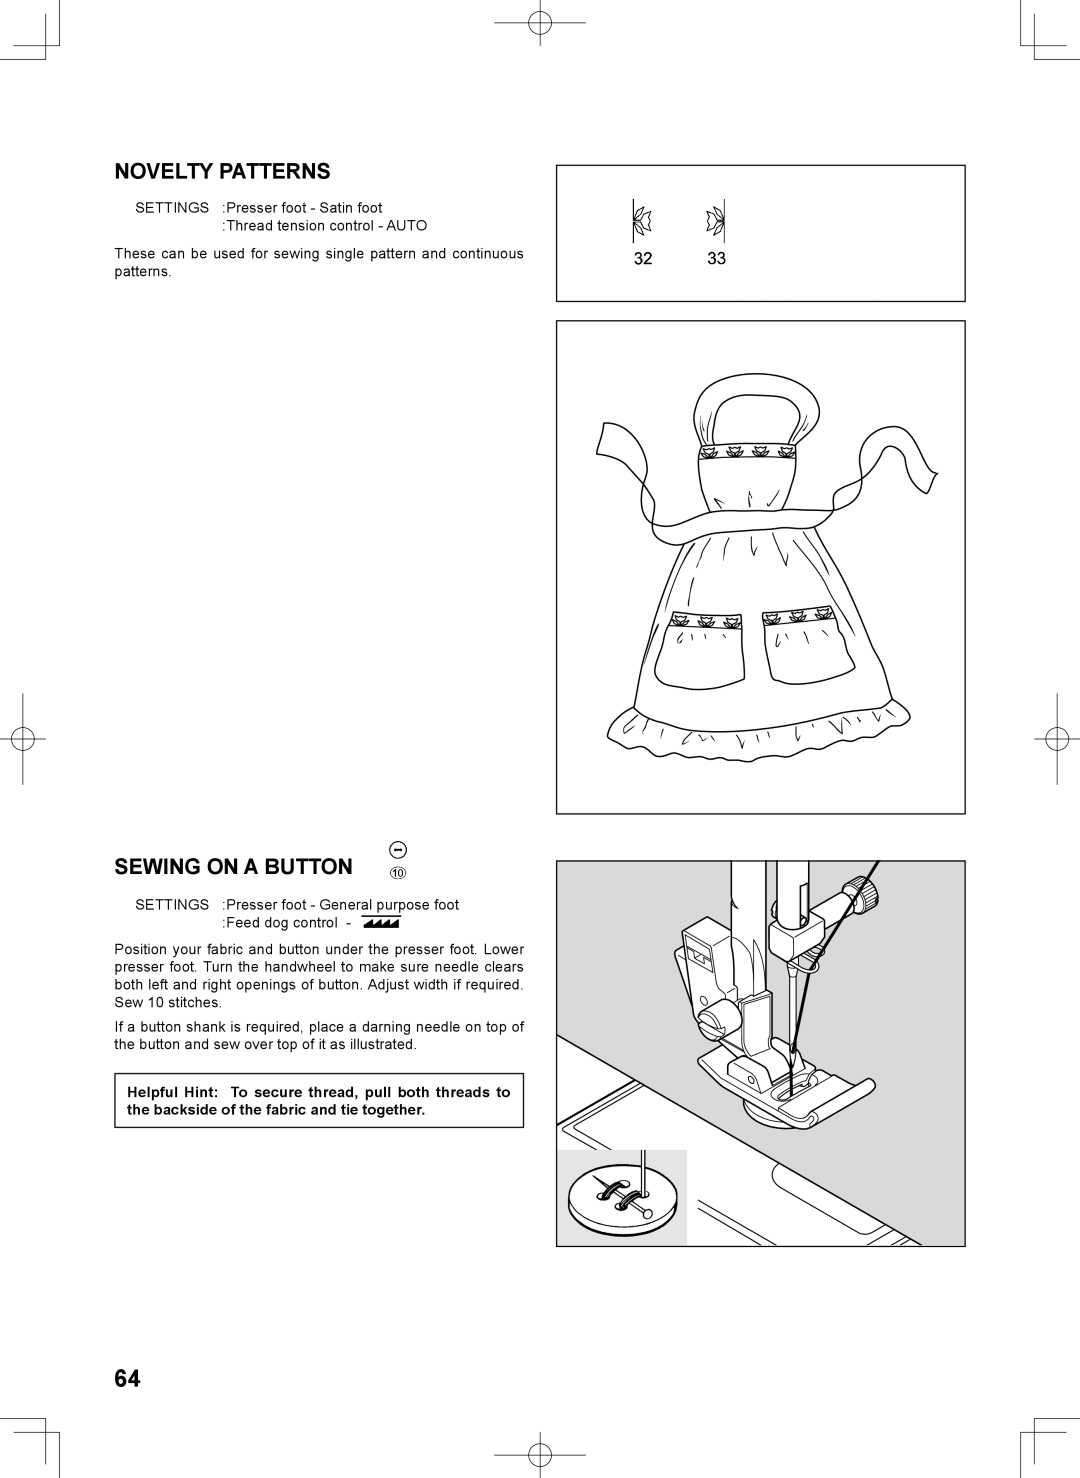 Singer 7467S instruction manual Novelty Patterns, Sewing On A Button 